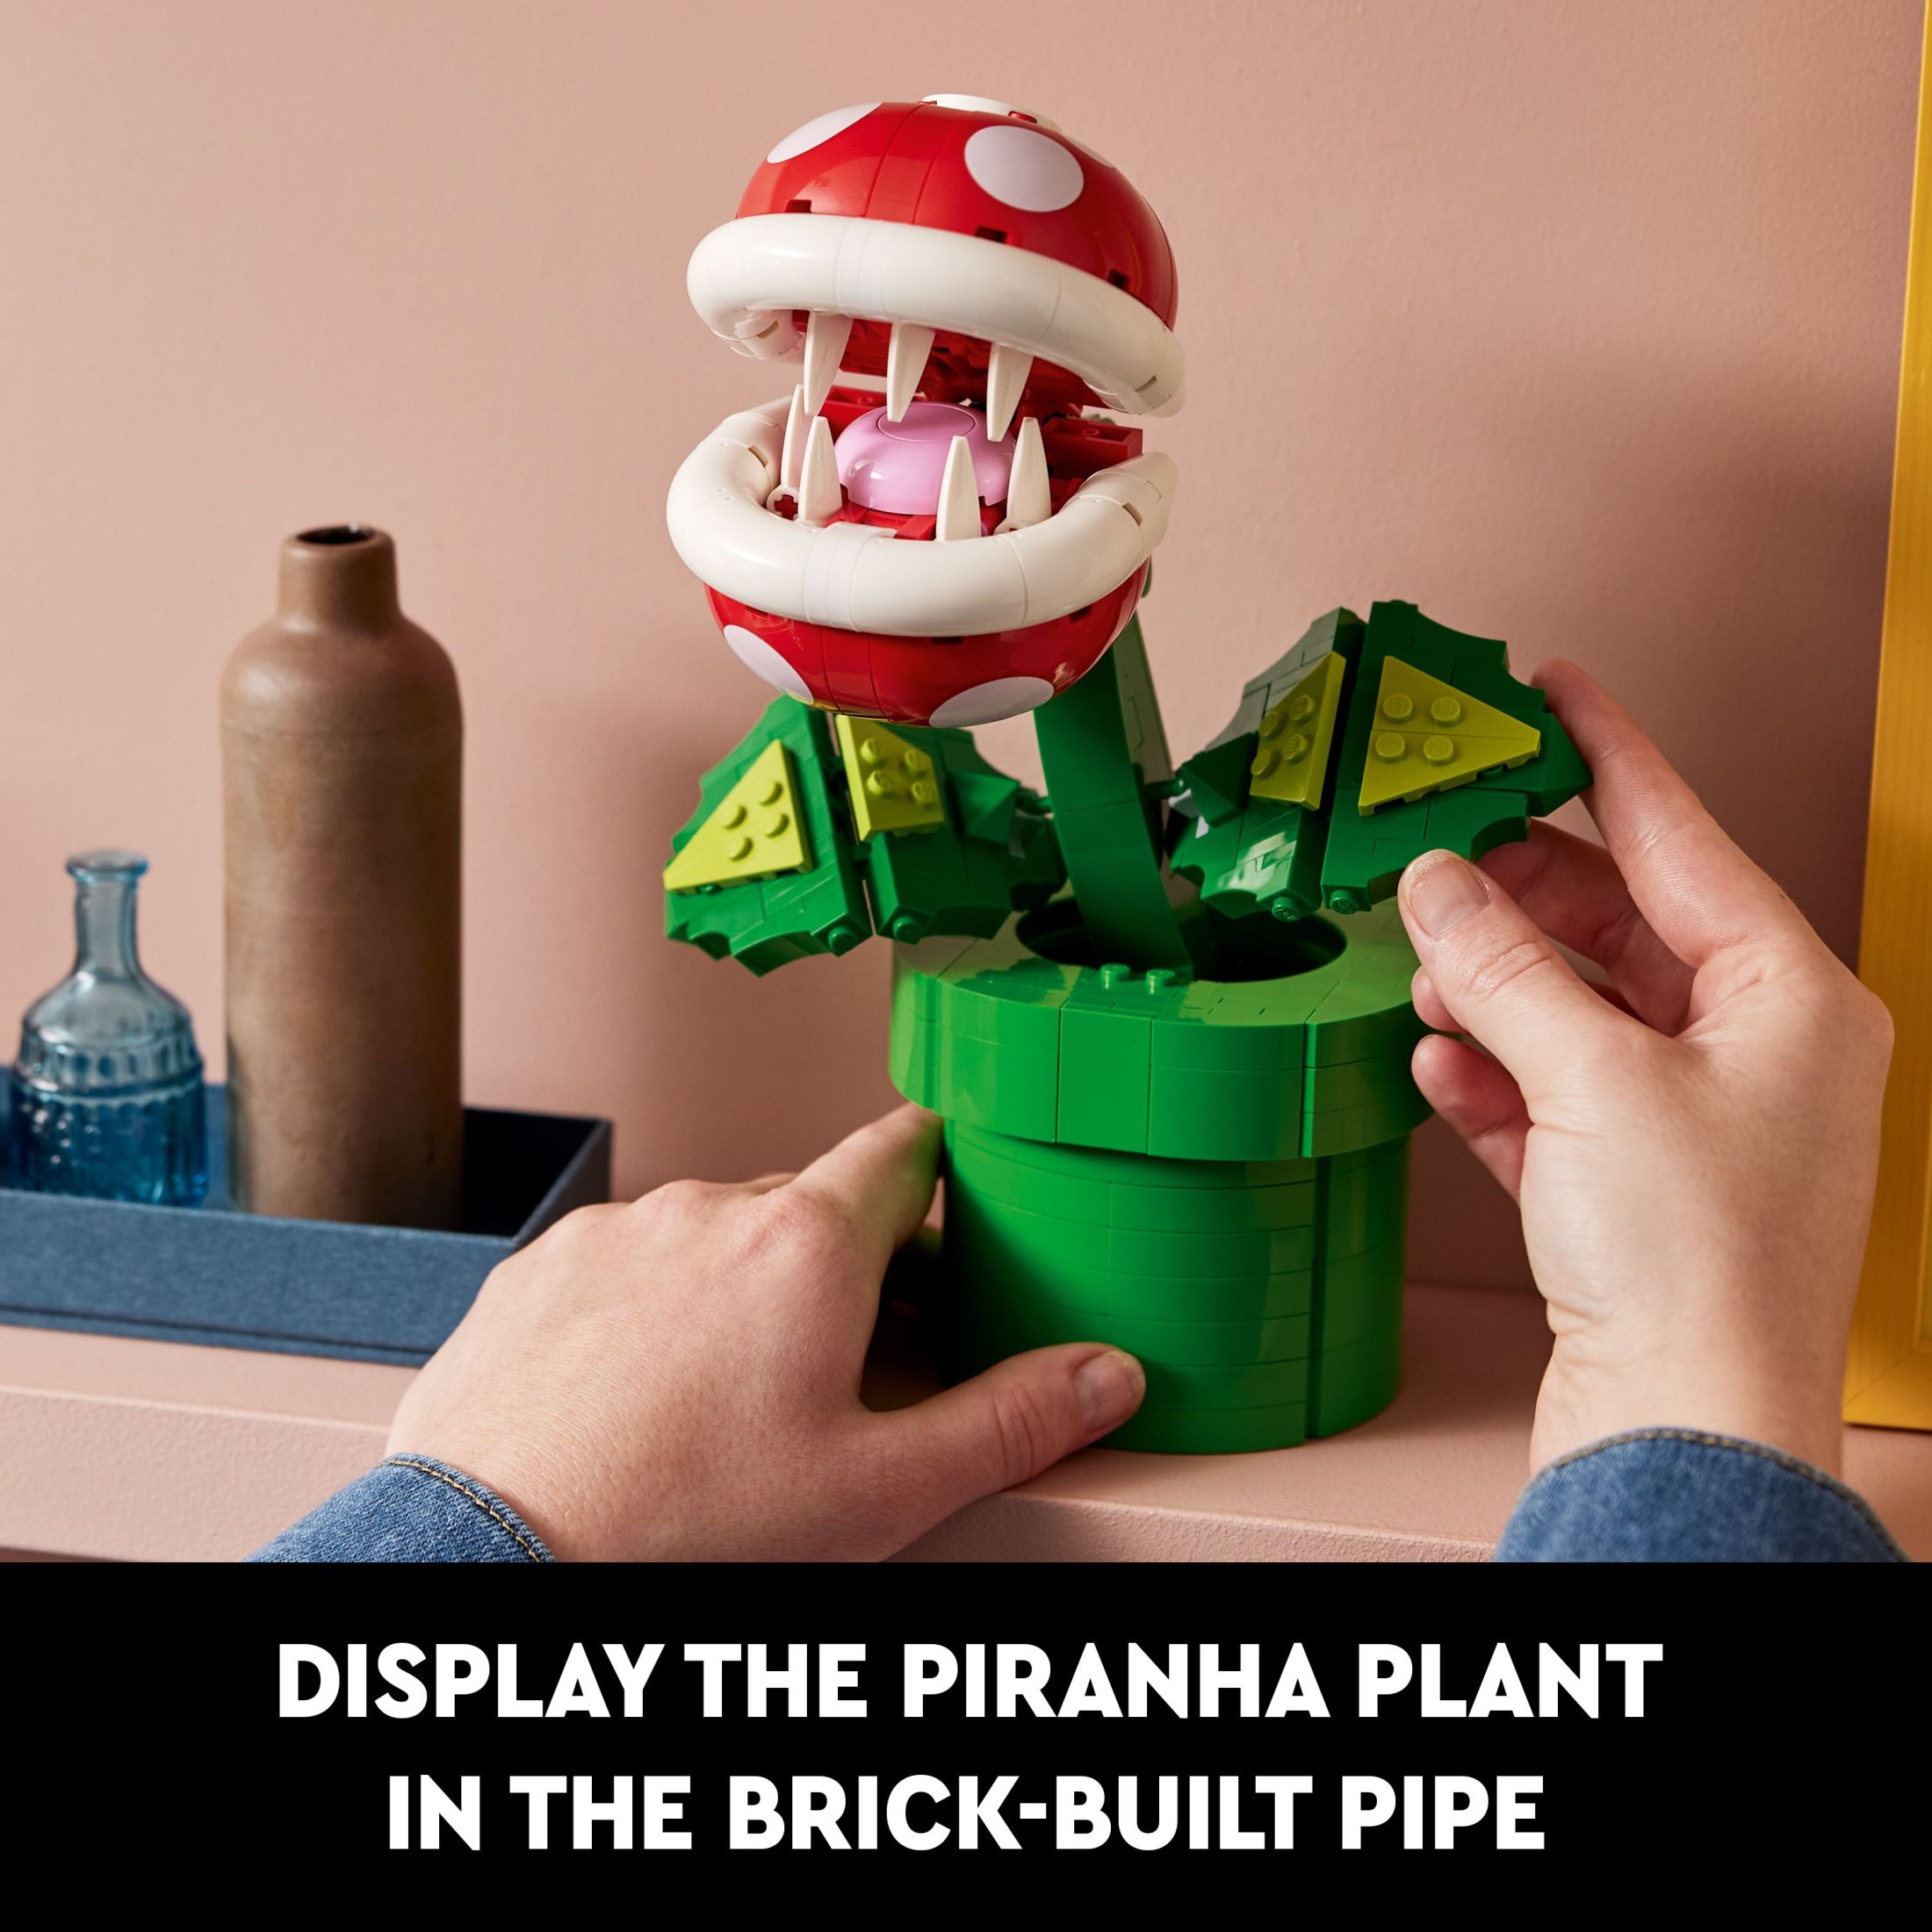 LEGO Super Mario Piranha Plant, Build and Display Super Mario Brothers Collectible for Adults and Teens, Authentically Detailed Posable Figure, Birthday Gift for Gamers and Super Mario Fans, 71426 - image 5 of 7